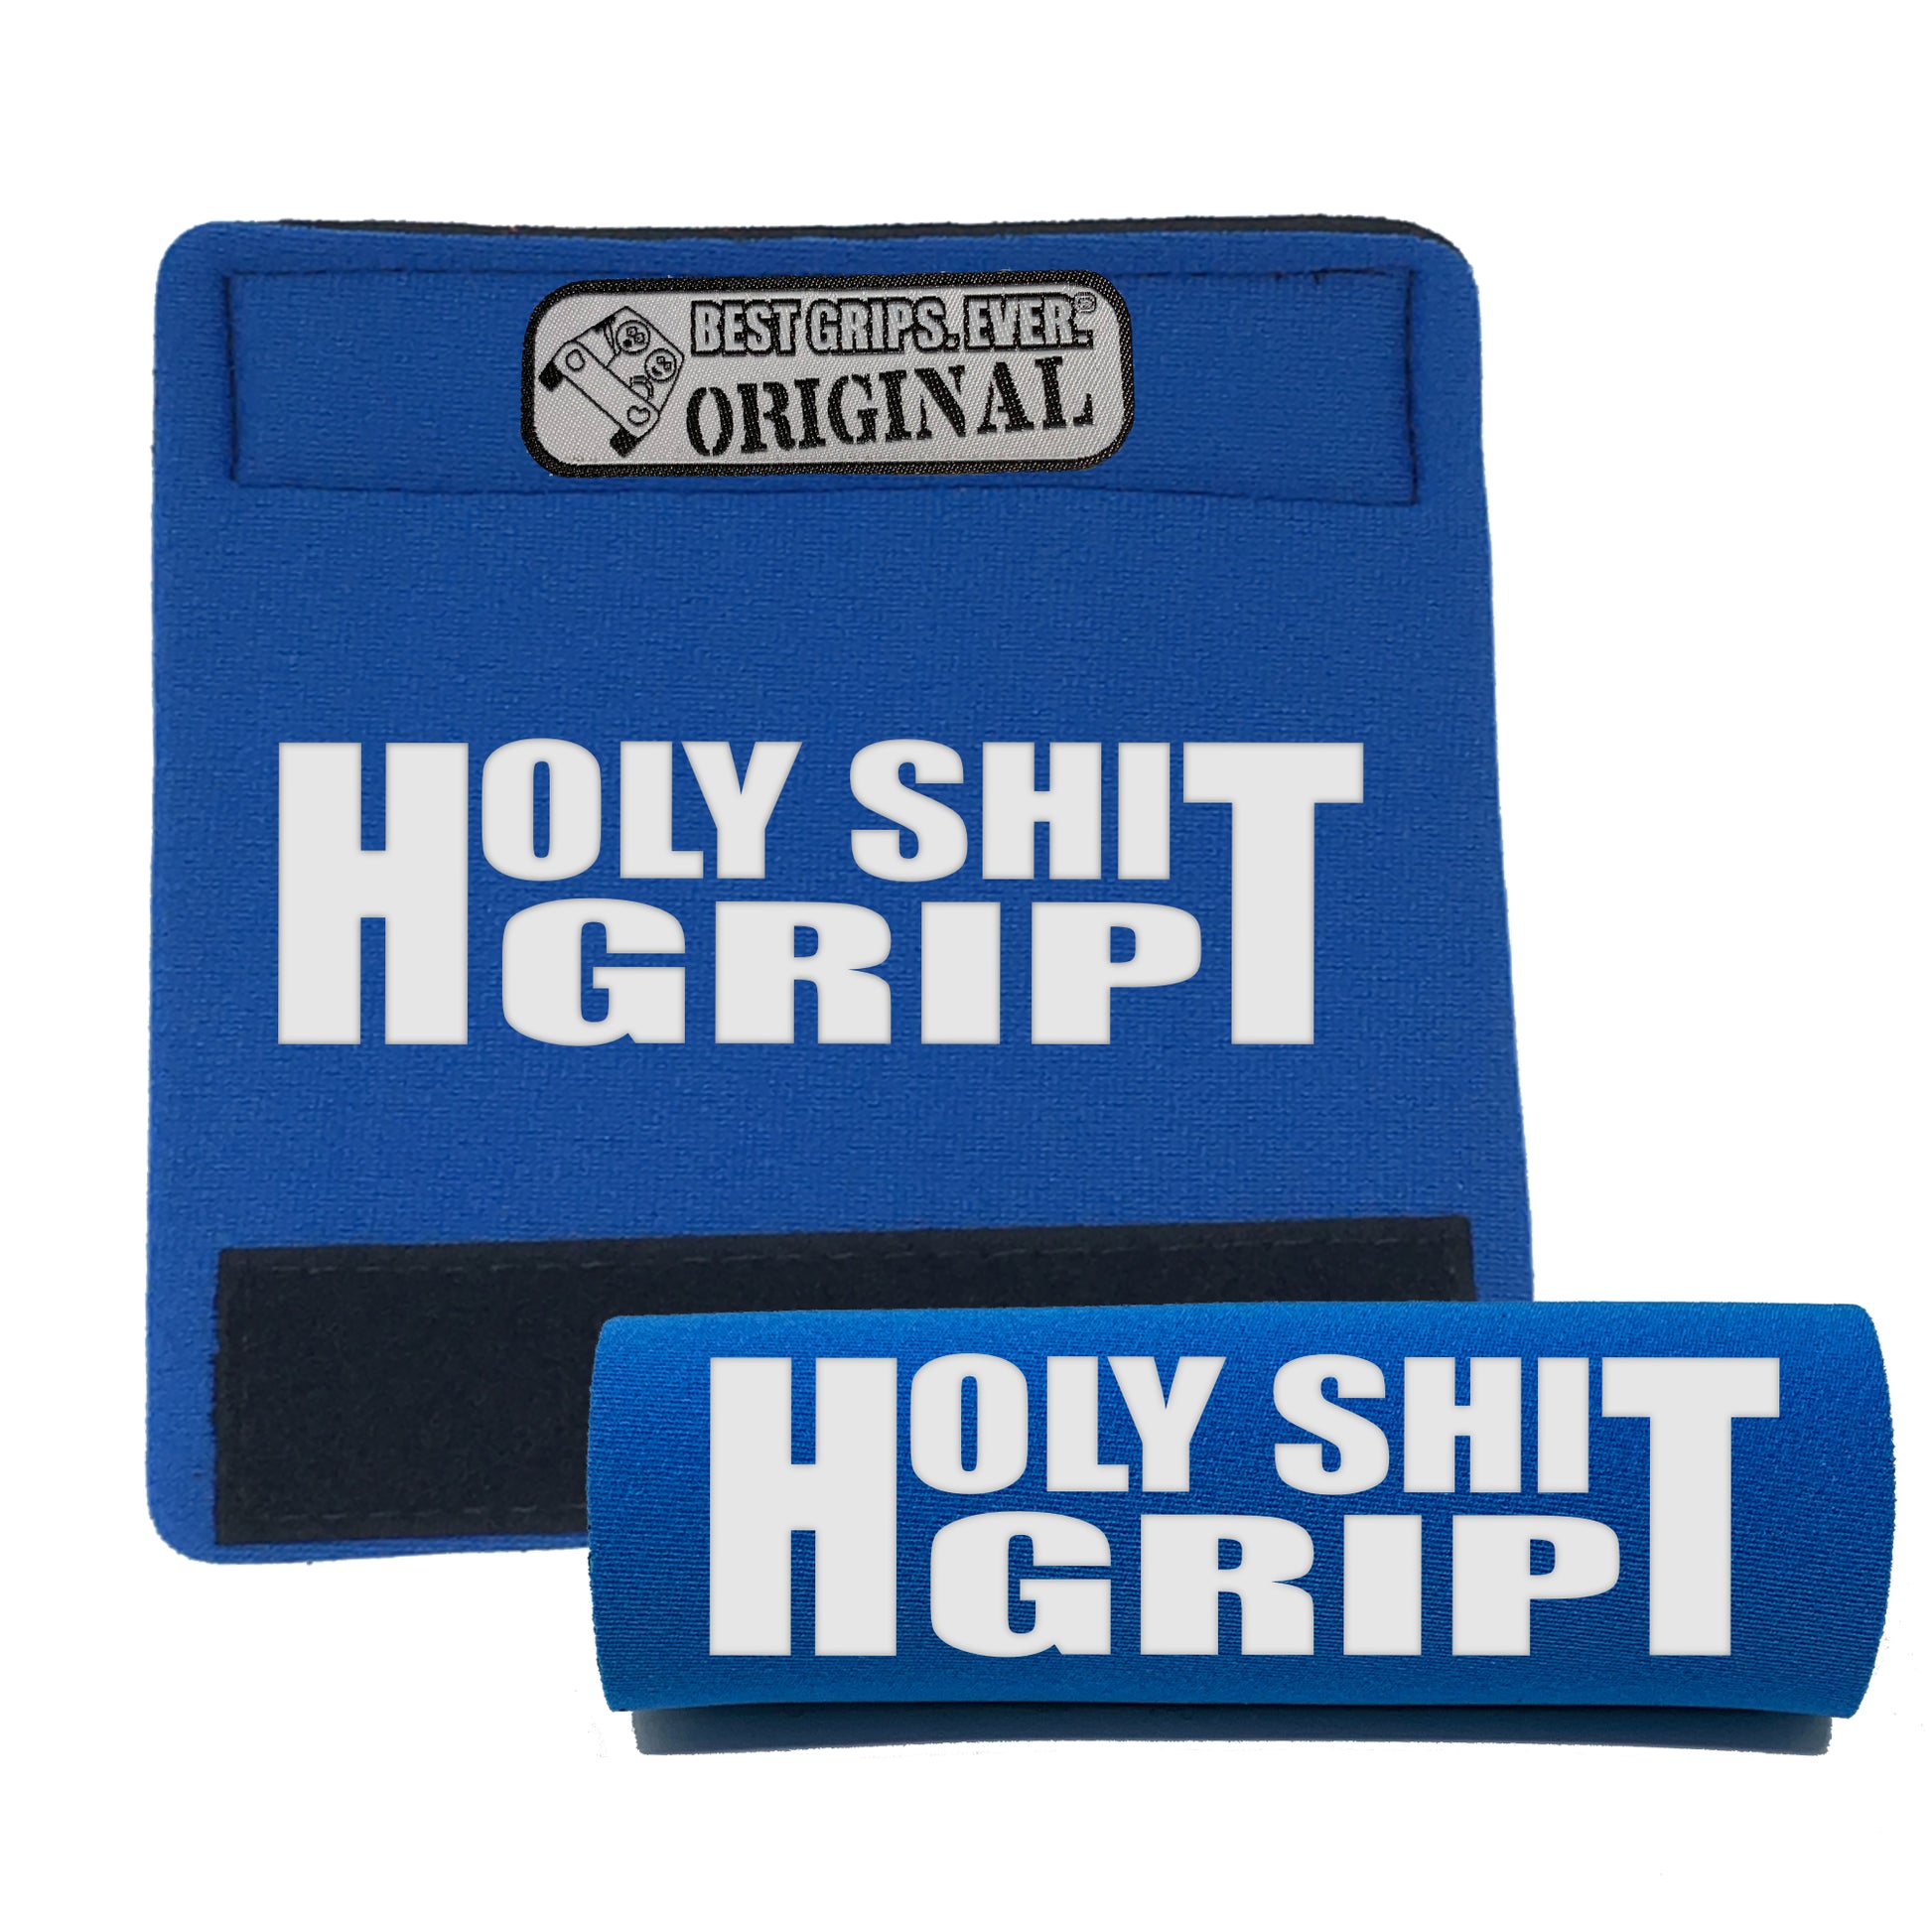 The Holy Shit Grip® - BEST GRIPS. EVER.®